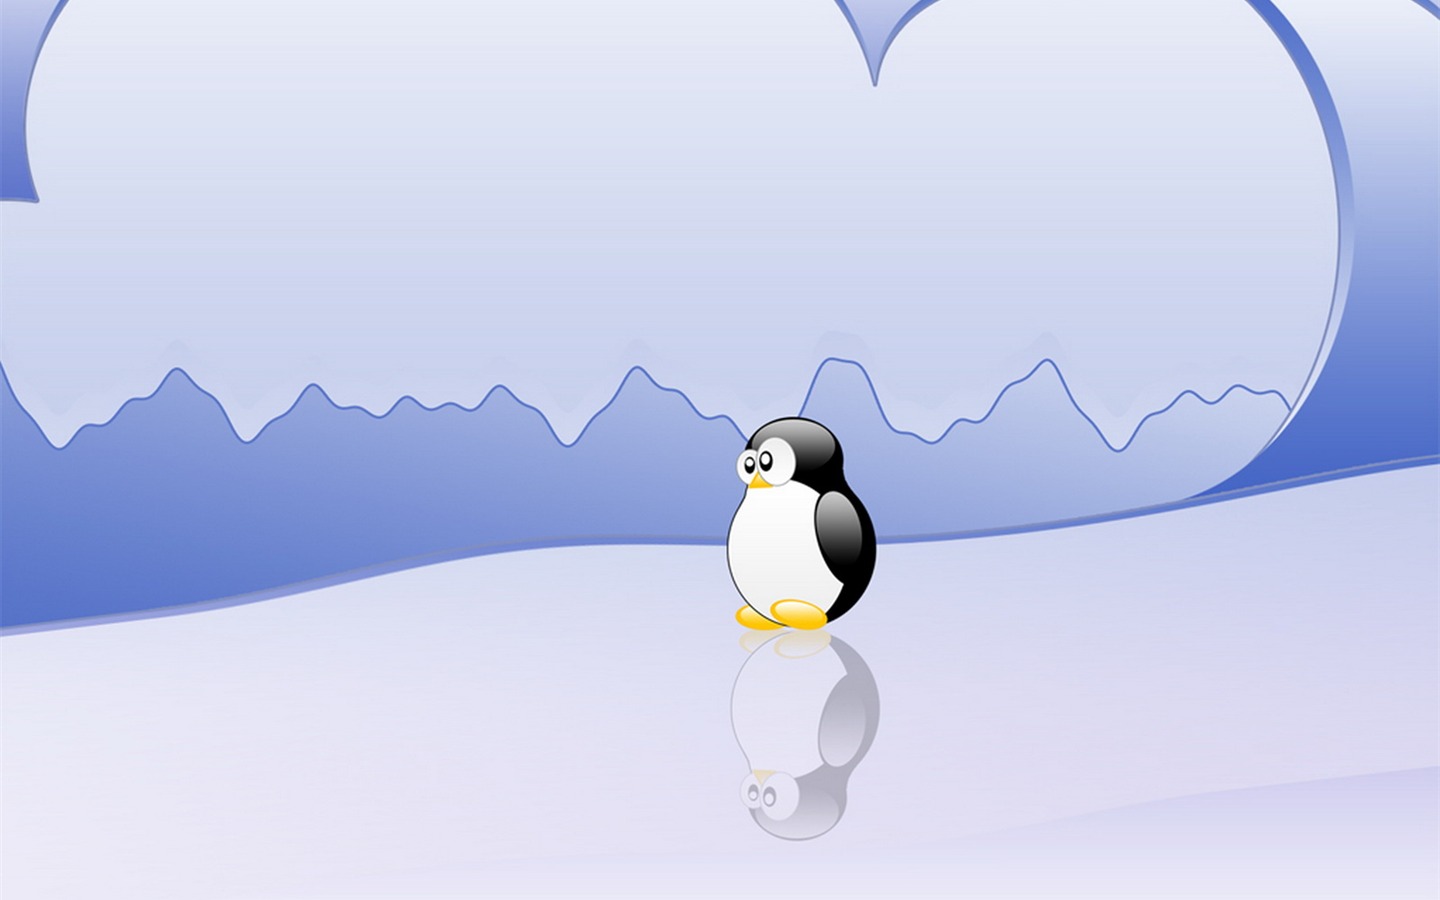 Linux tapety (2) #19 - 1440x900